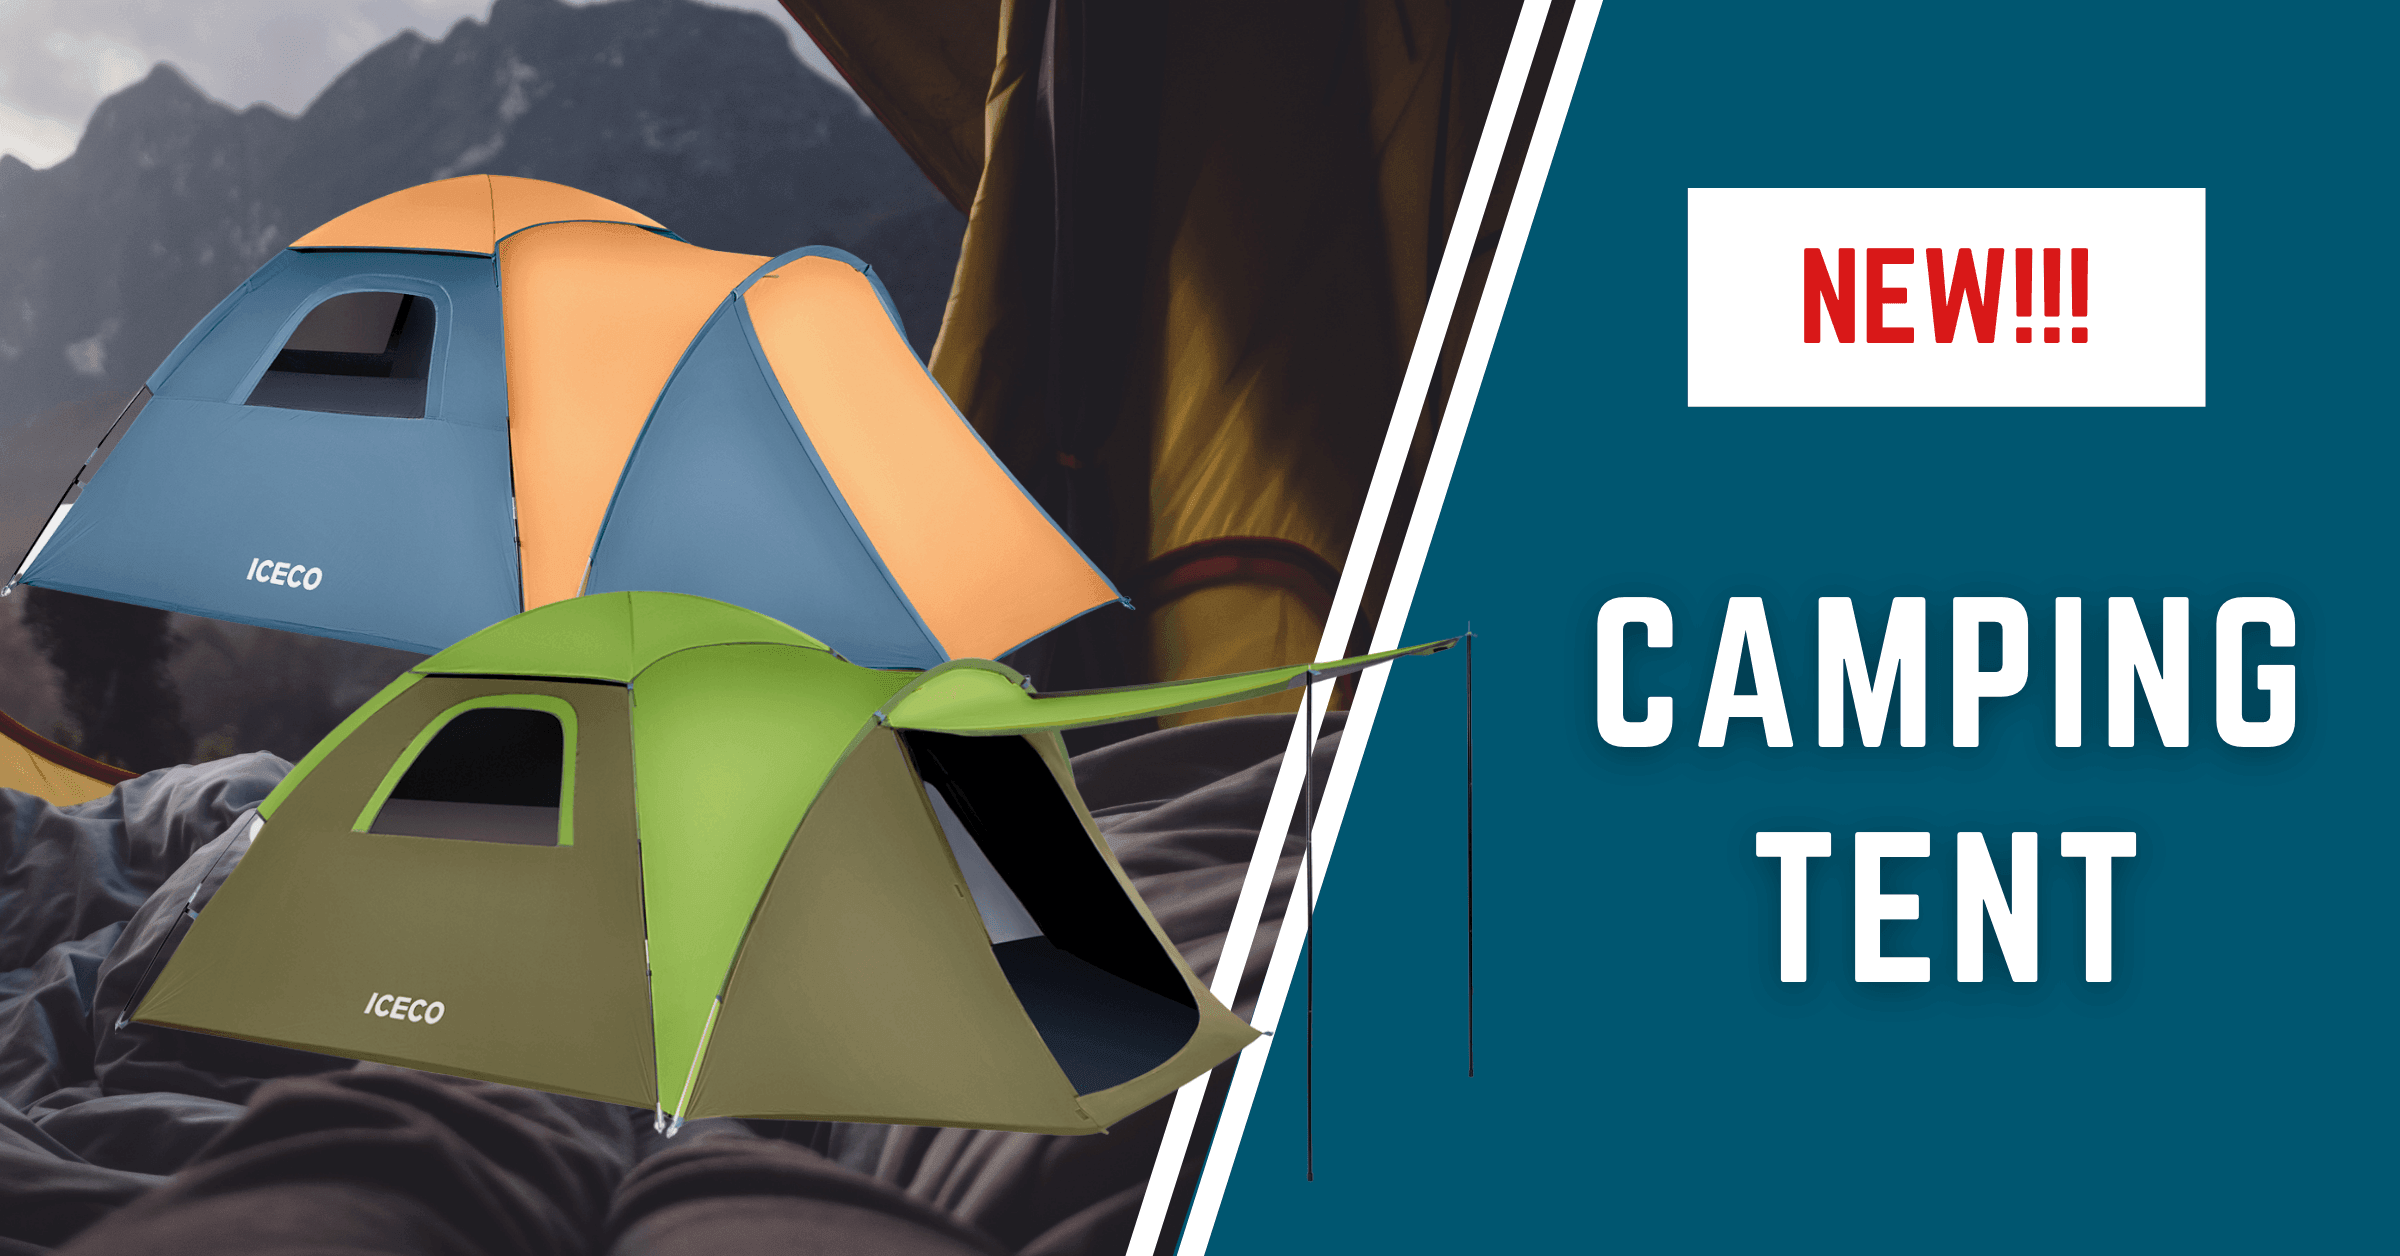 Introducing ICECO’s New Camping Tent for Family Camping - www.icecofreezer.com